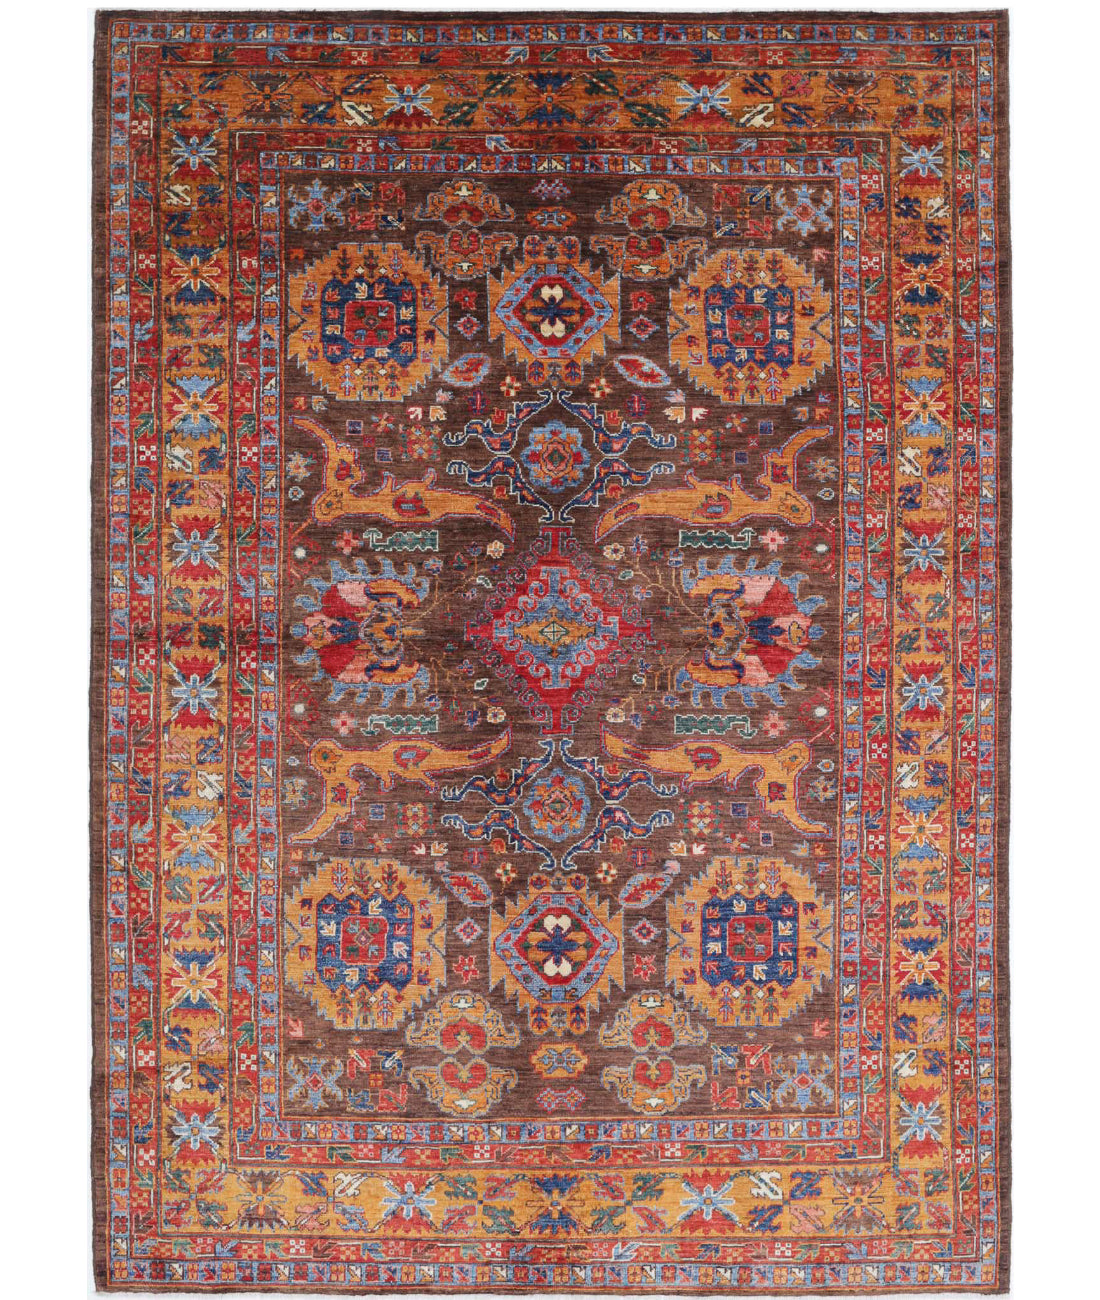 Hand Knotted Nomadic Caucasian Humna Wool Rug - 6'0'' x 8'7'' 6'0'' x 8'7'' (180 X 258) / Brown / Gold